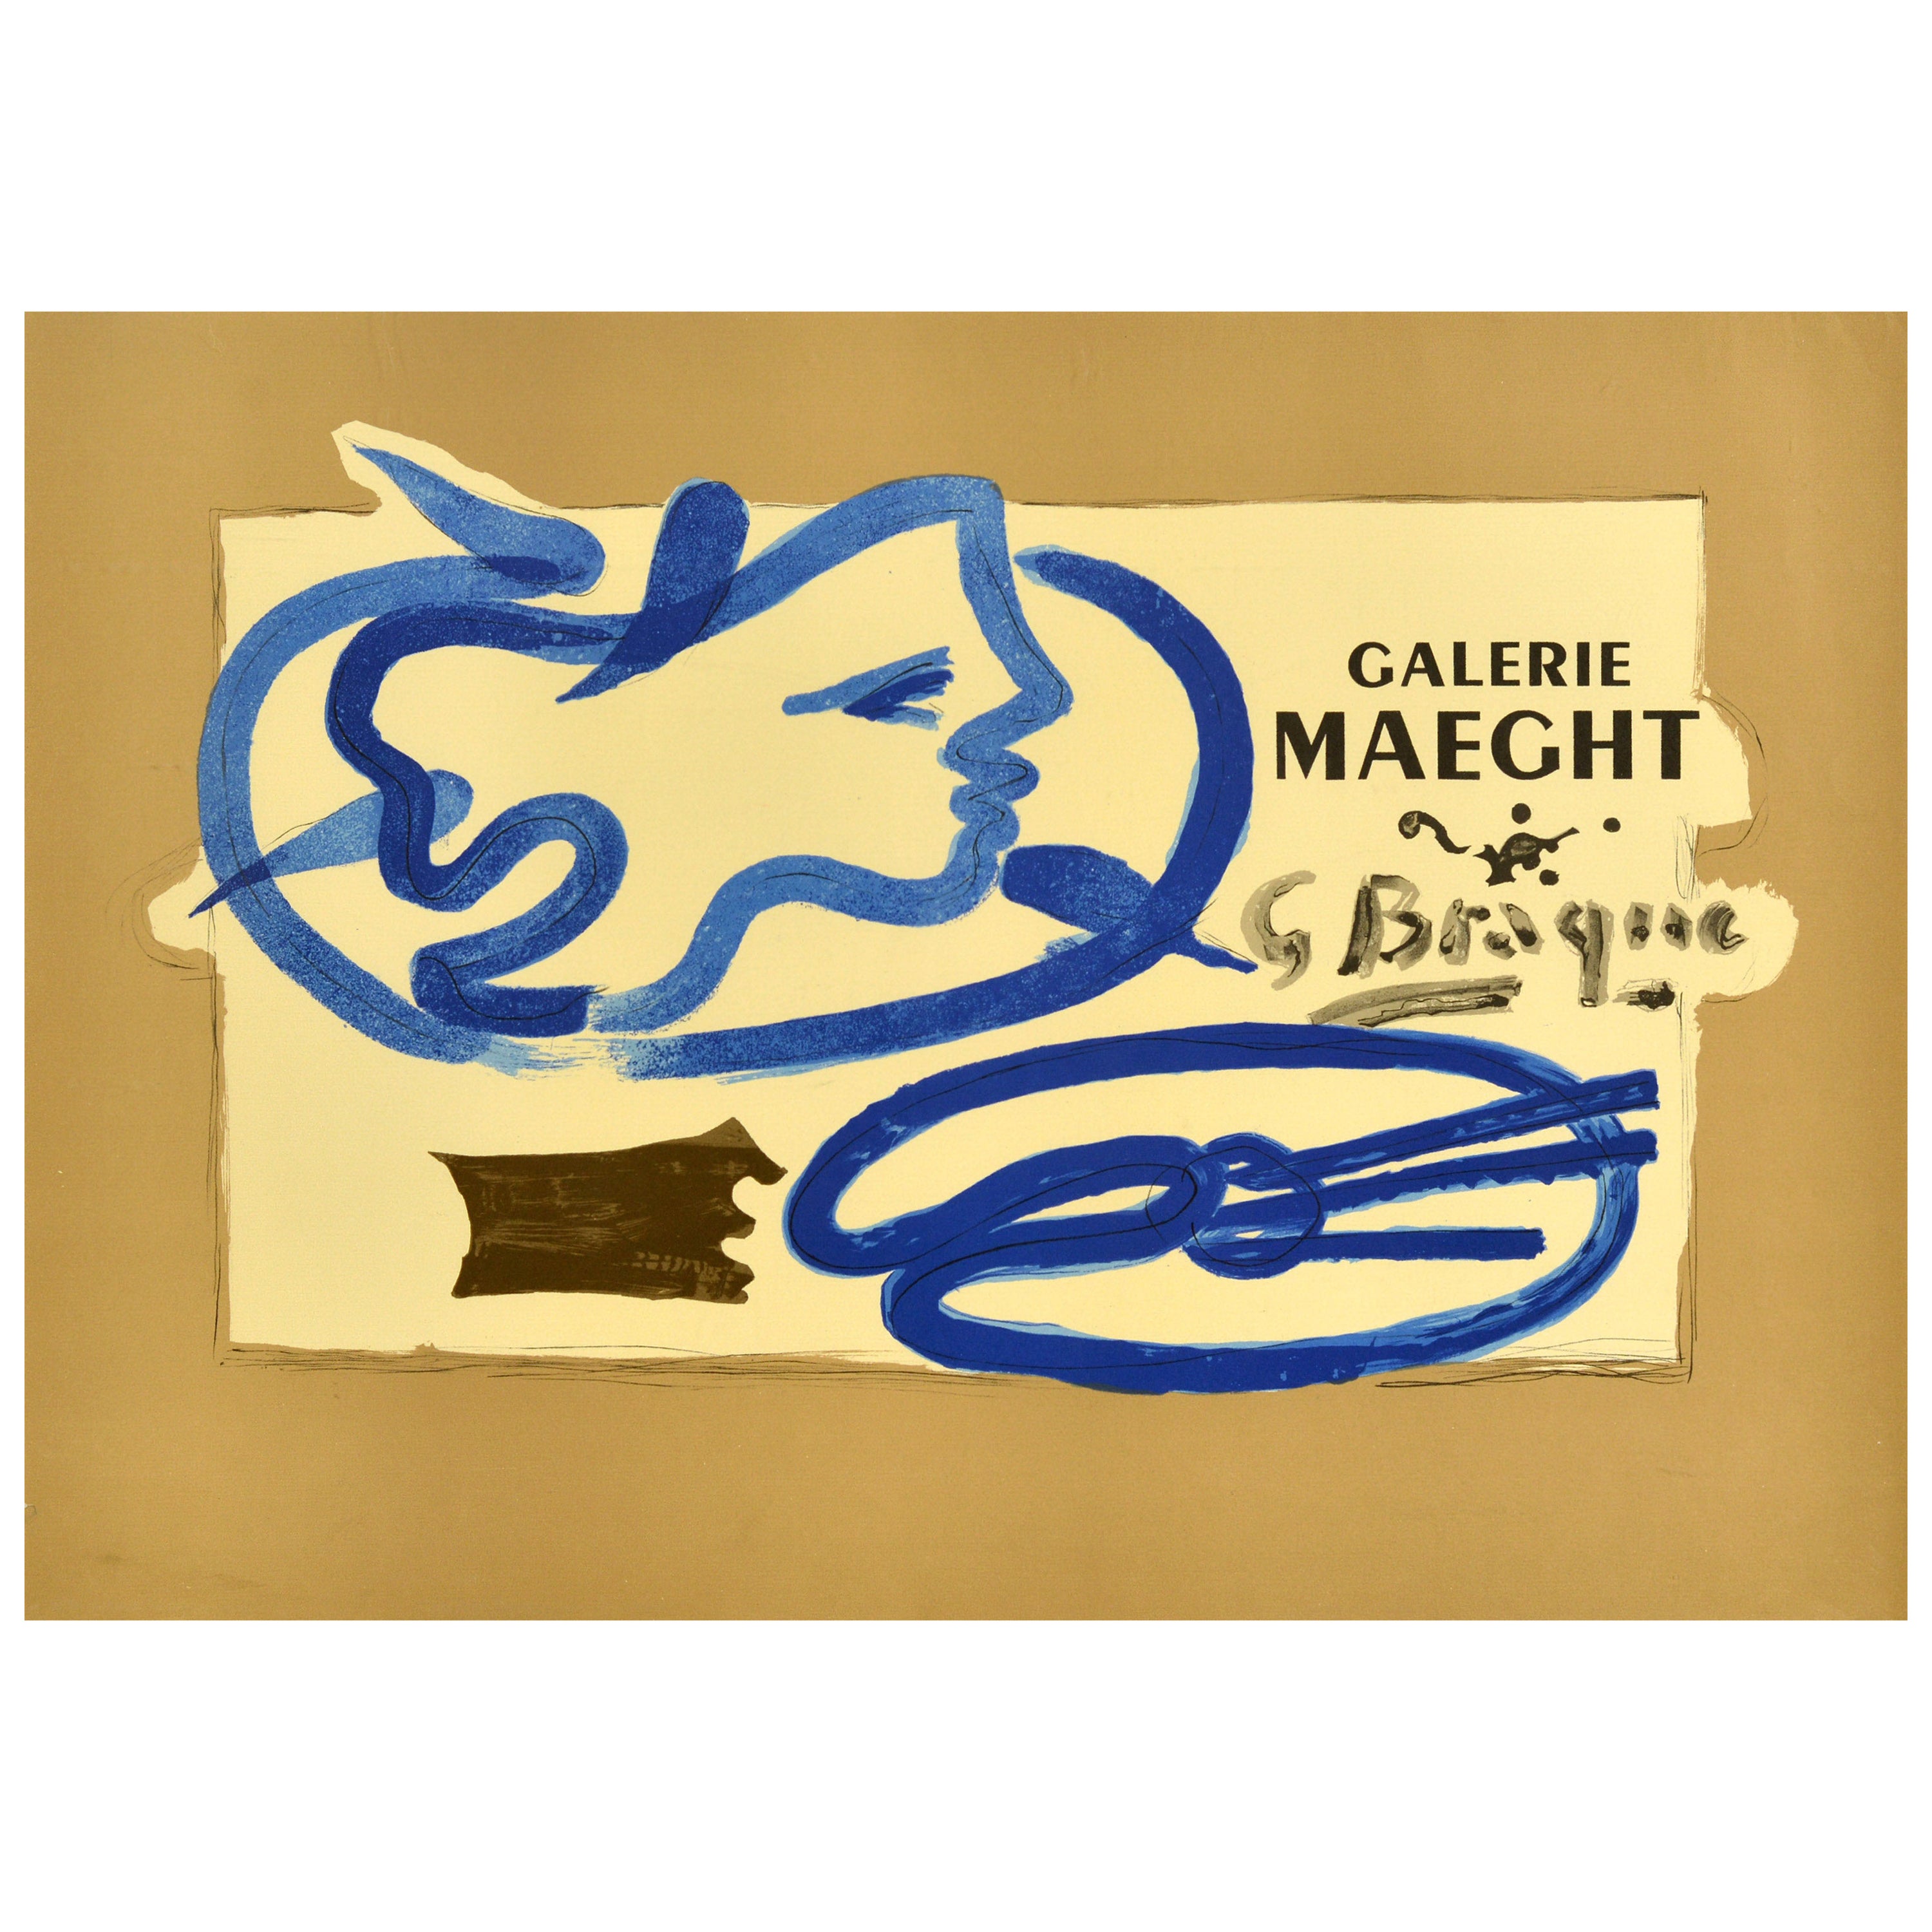 Original Vintage Art Exhibition Advertising Poster Georges Braque Galerie Maeght For Sale